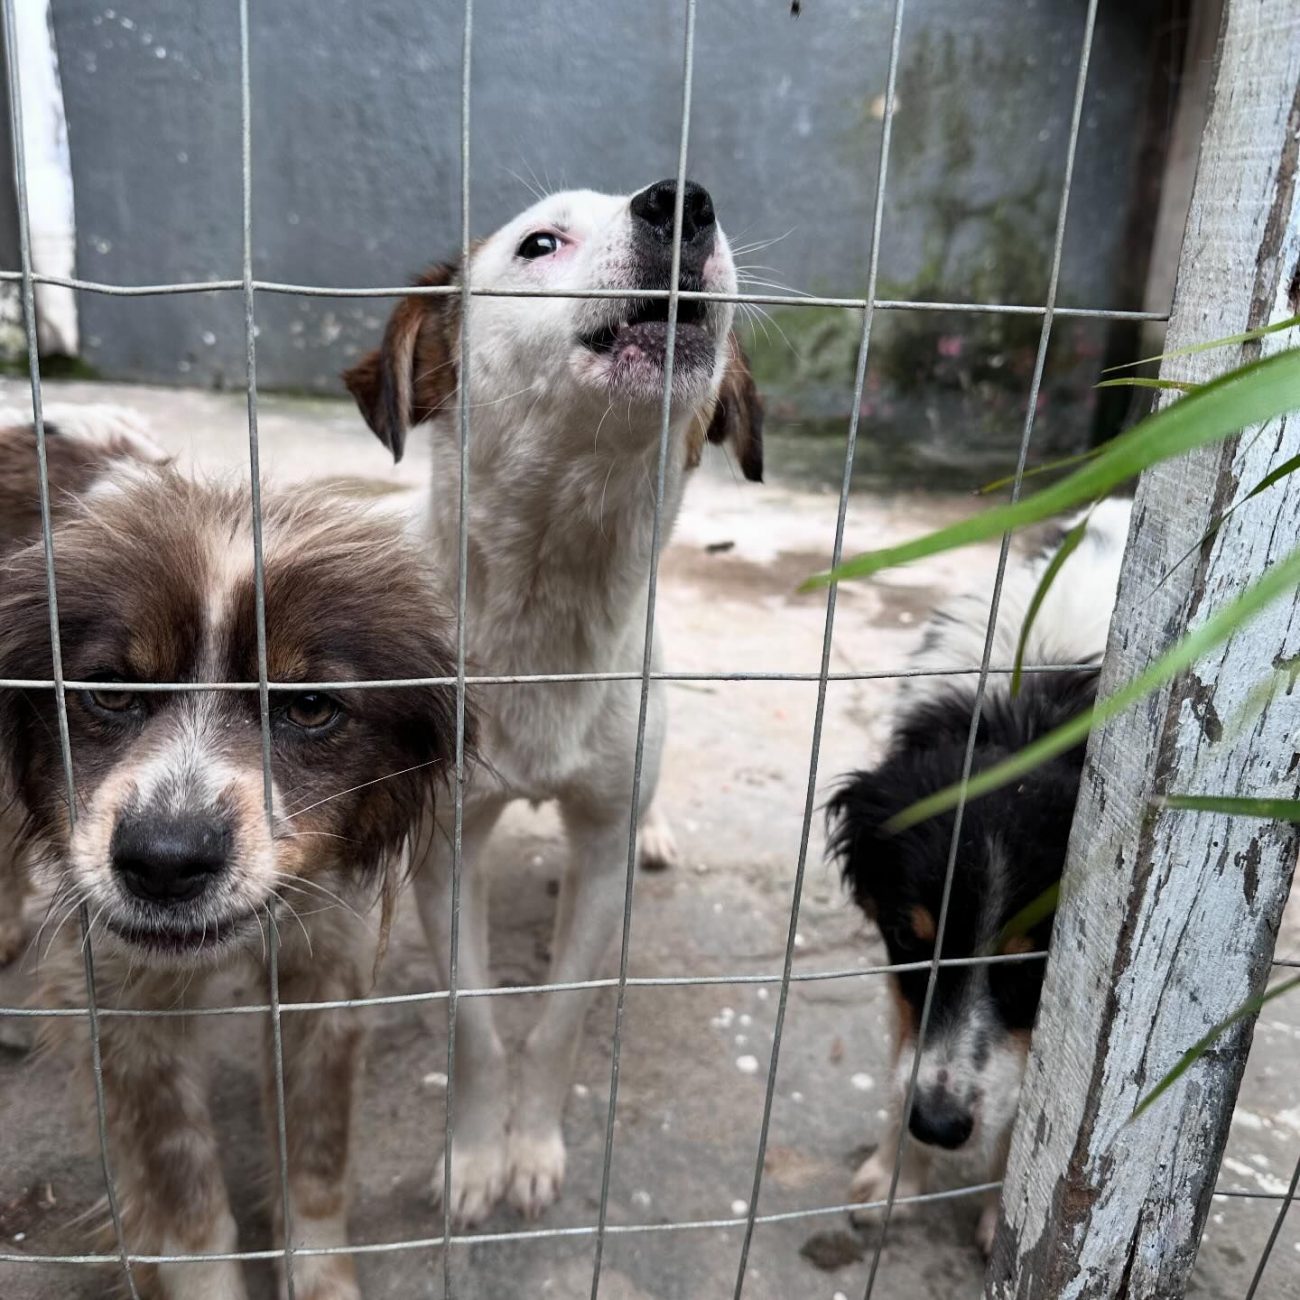 Three dogs were rescued from abuse at the home of a man who will face charges for throwing another dog in the trash in Palos - Bem Estar Animal Palhoça/Divulgação/ND